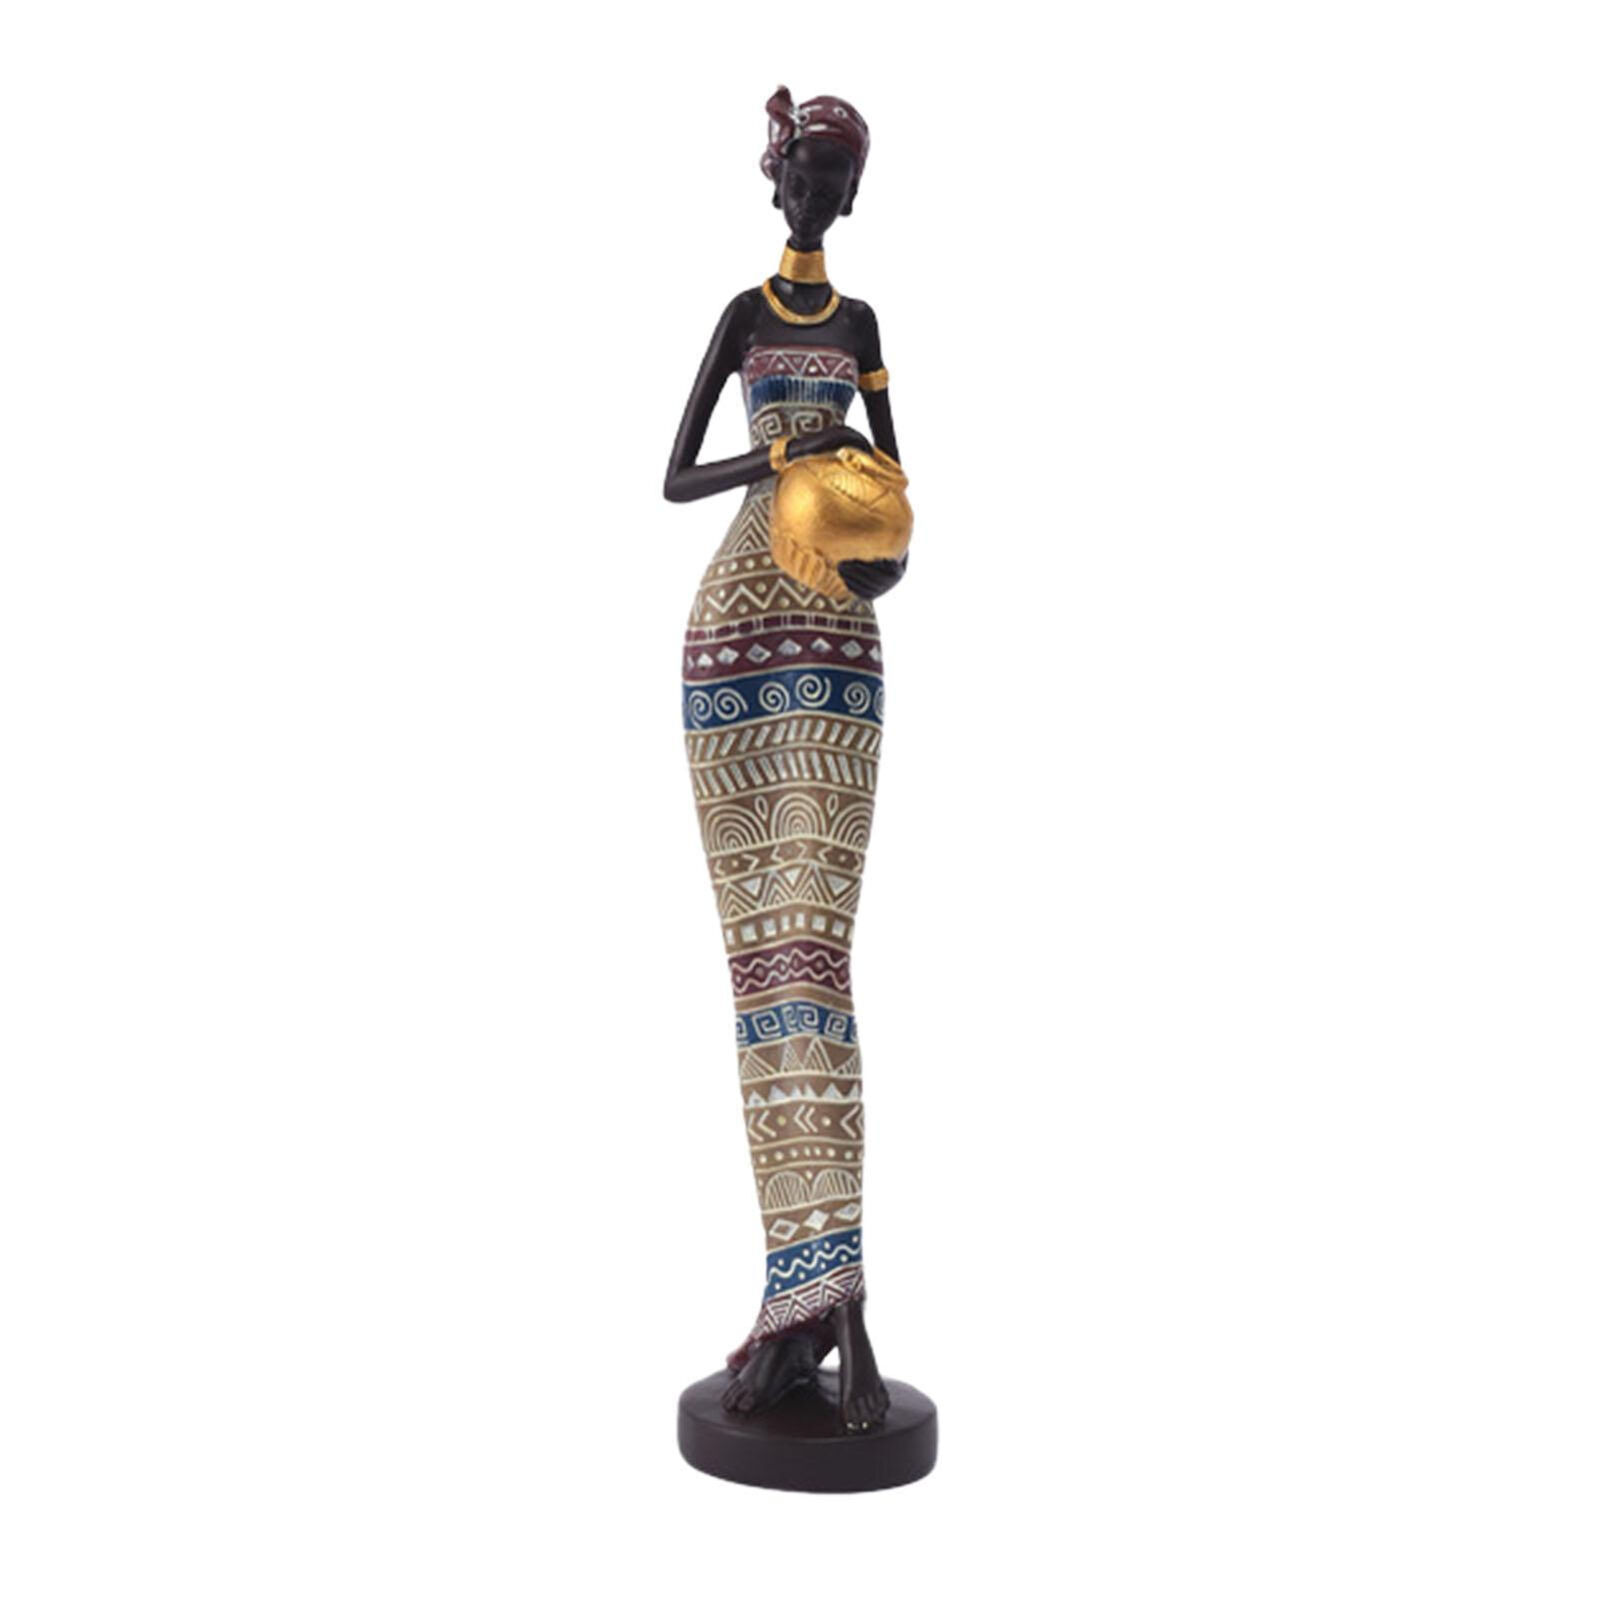 African Women Sculptures Lady Statues Art Resin Table Desk Home Decor Ornaments